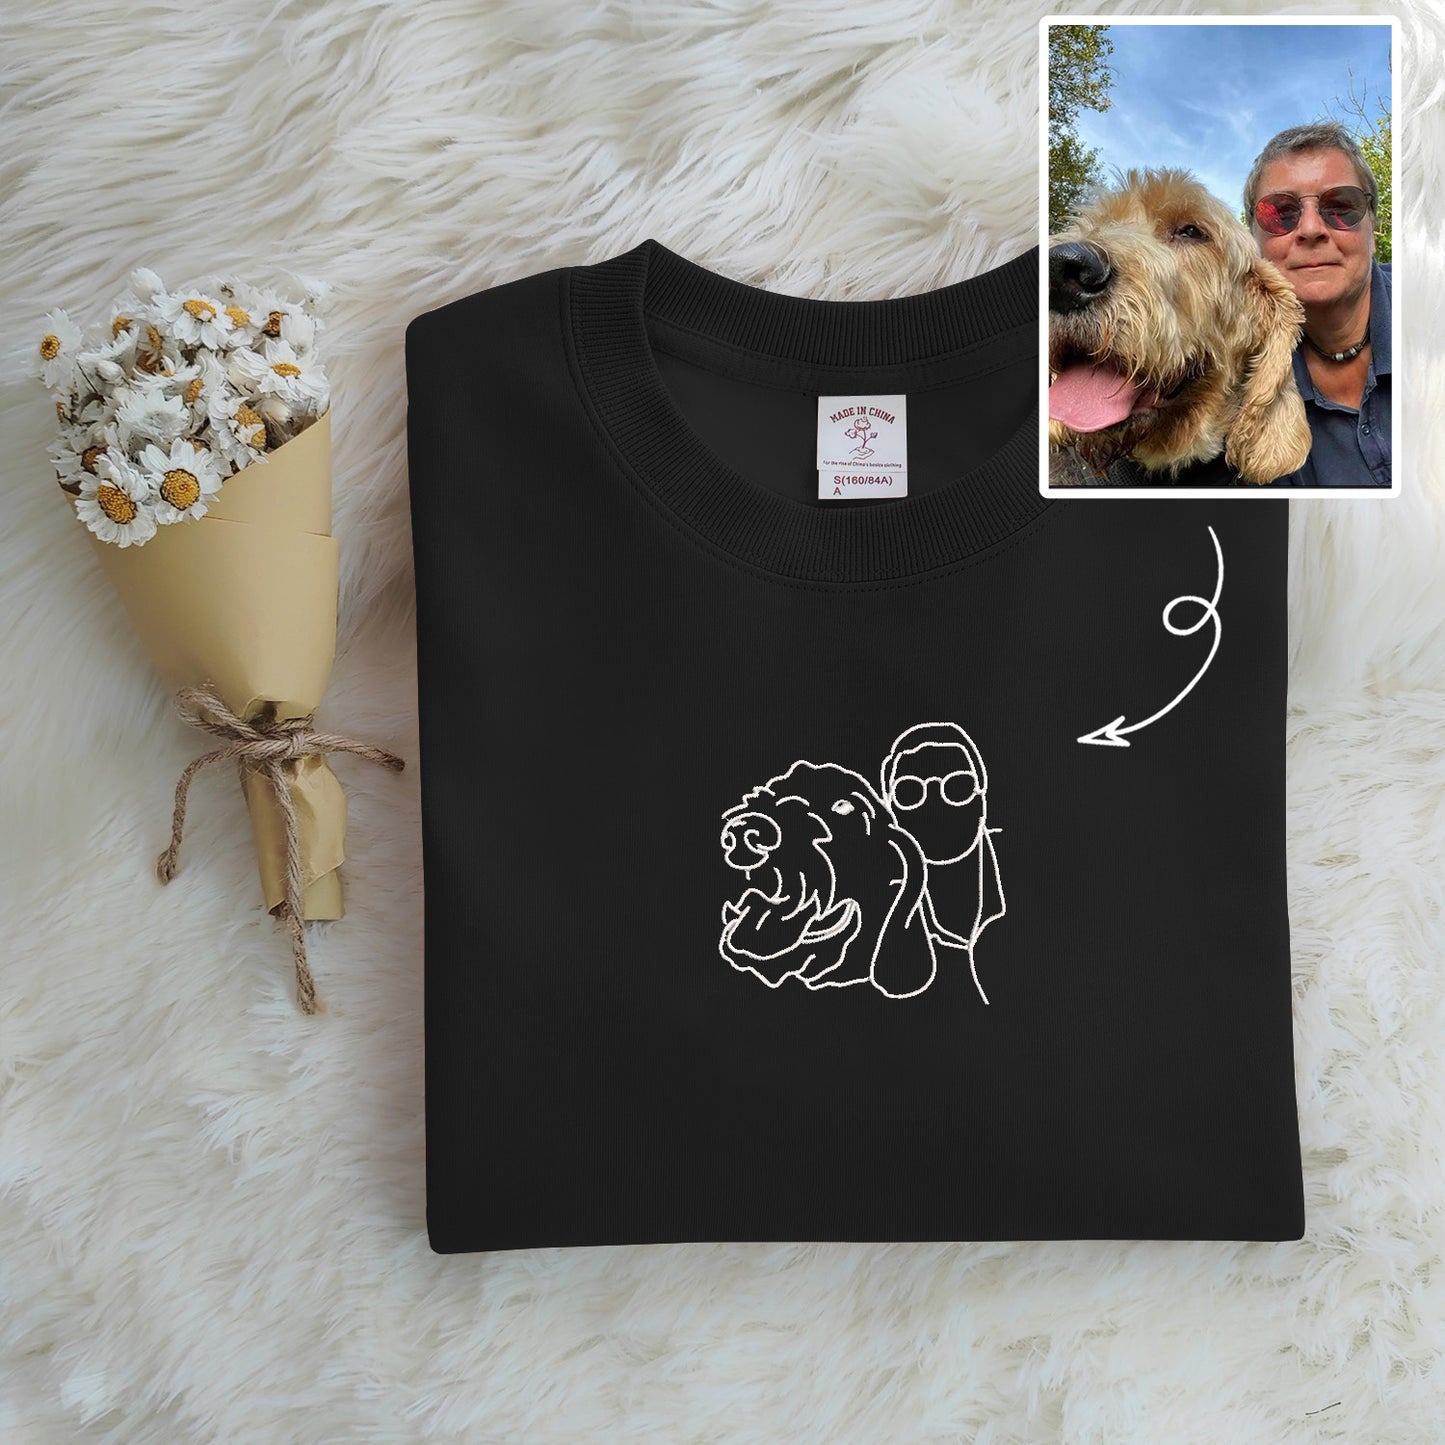 Customized Pet Photo Embroidered Sweatshirt, Style for Your Furry Friend